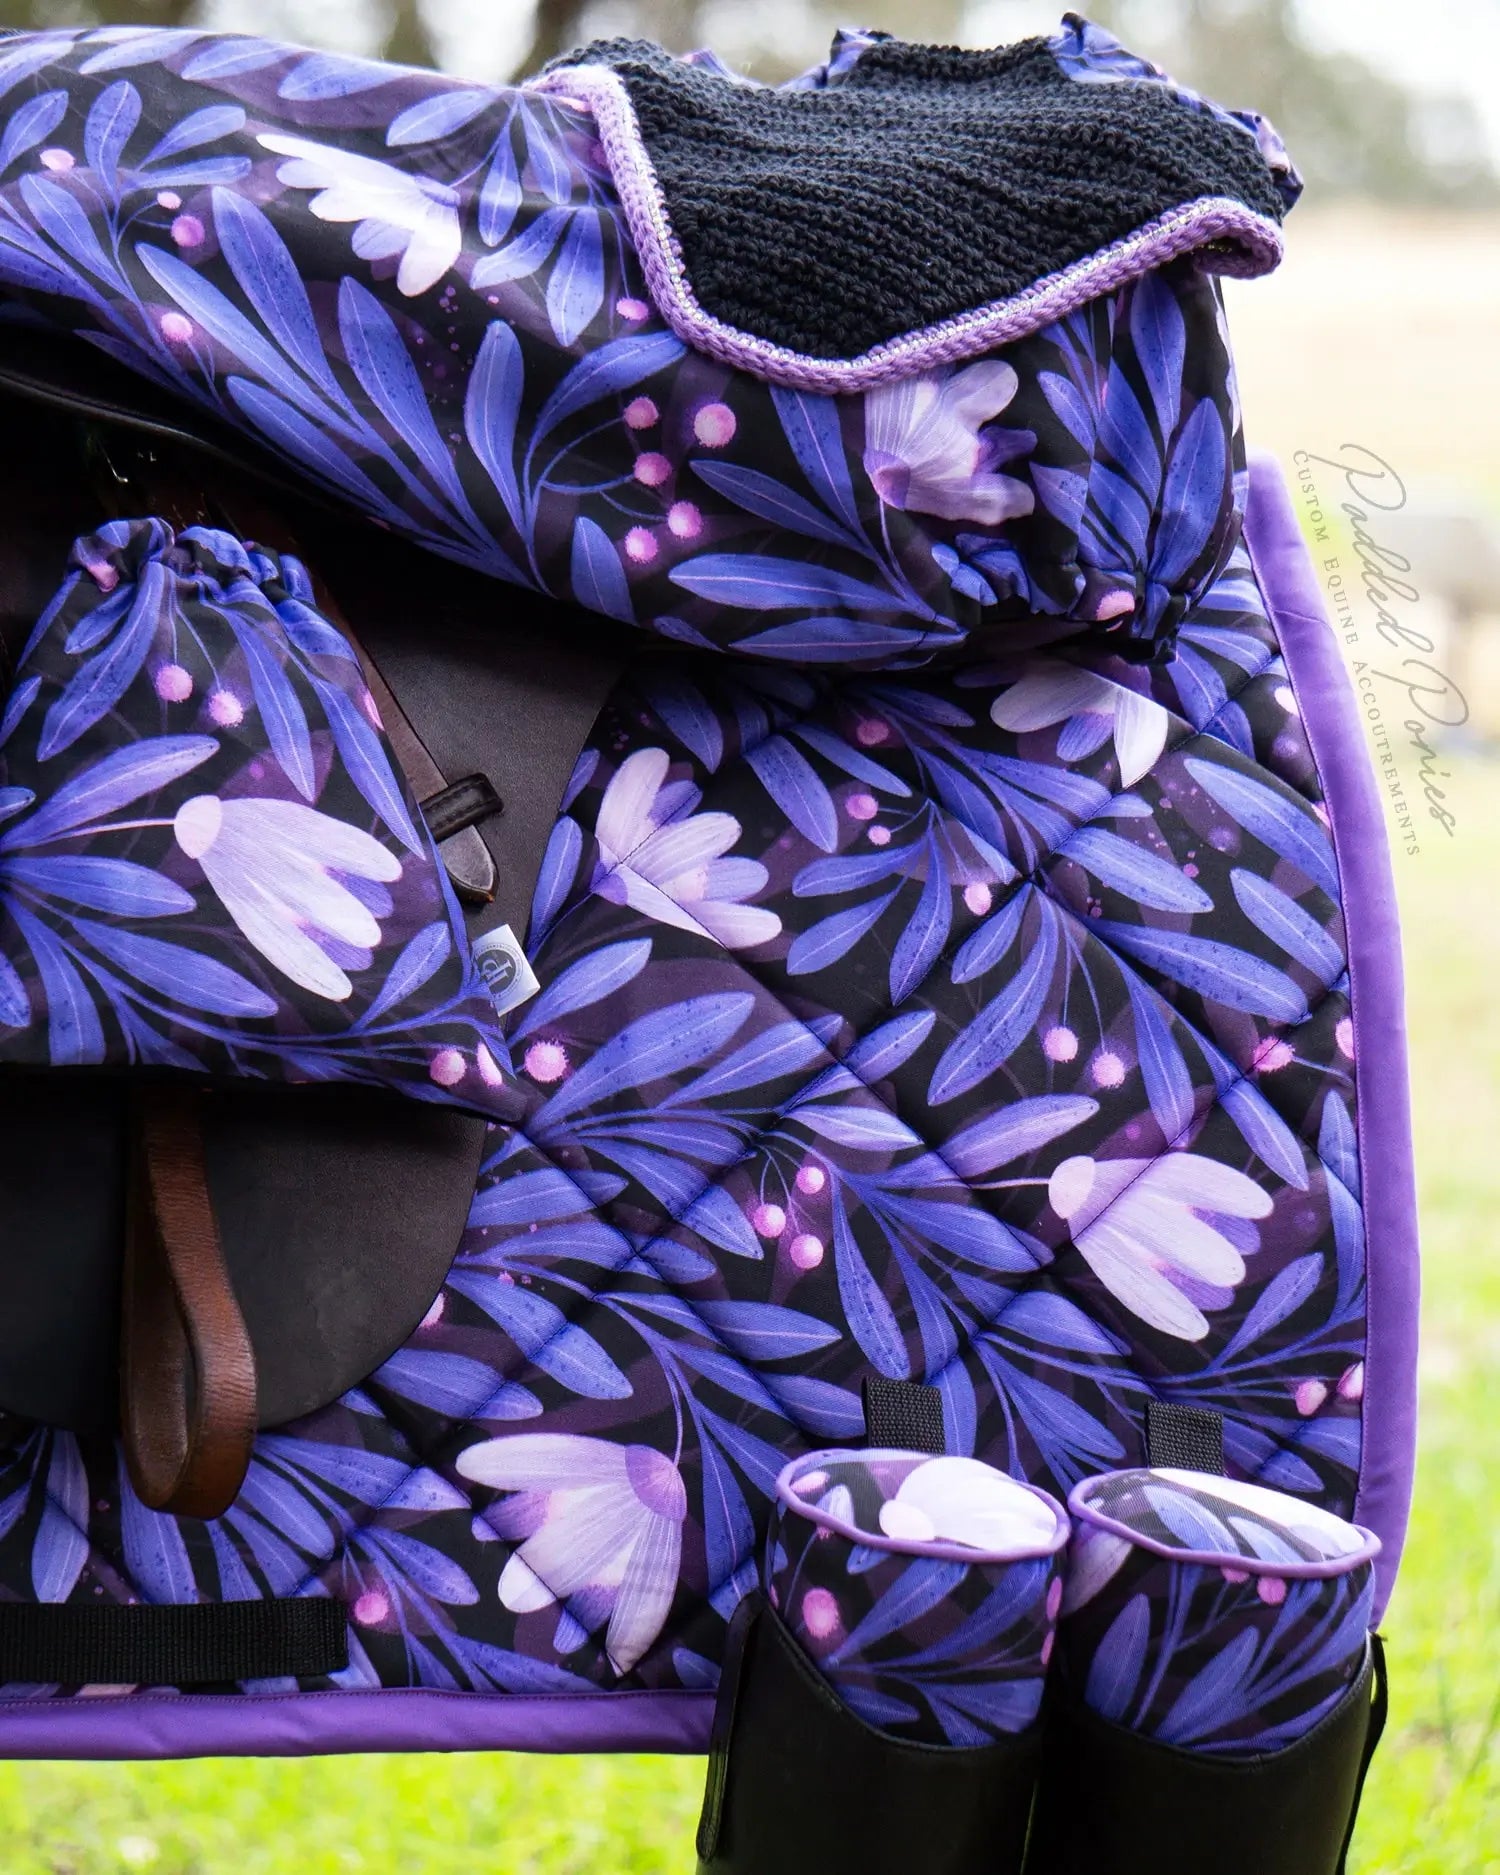 Purple Indigo Lavender Moonflowers Floral All Purpose Saddle Cover Set with Matching Accessories 